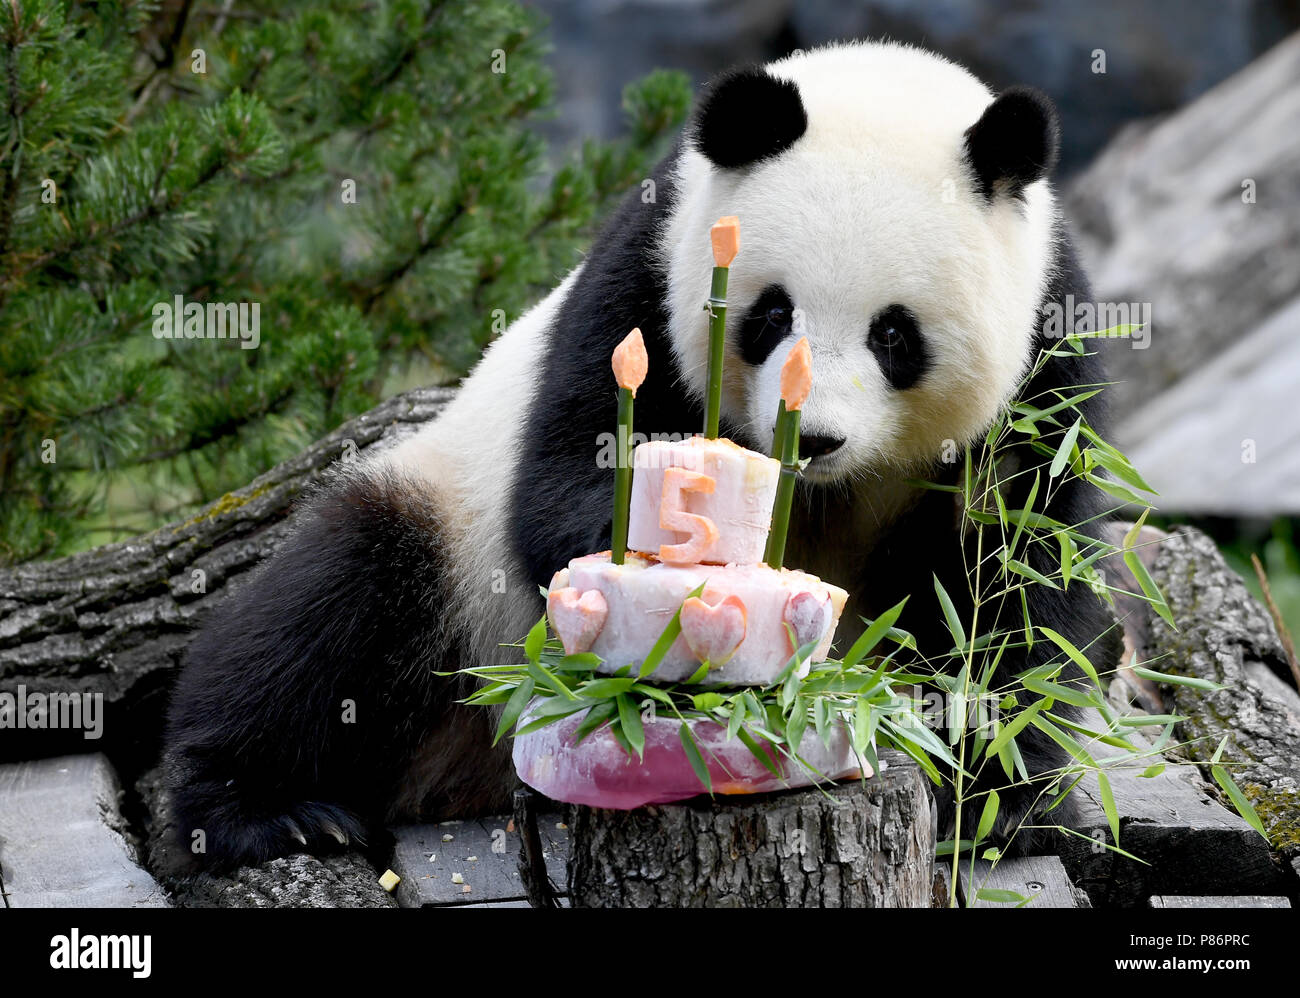 Berlin, Germany. 10th July, 2018. Panda female Meng Meng takes a look at  her birthday cake at her enclosure at the Berlin Zoological Garden. The  animal keepers served a sugar-free birthday cake